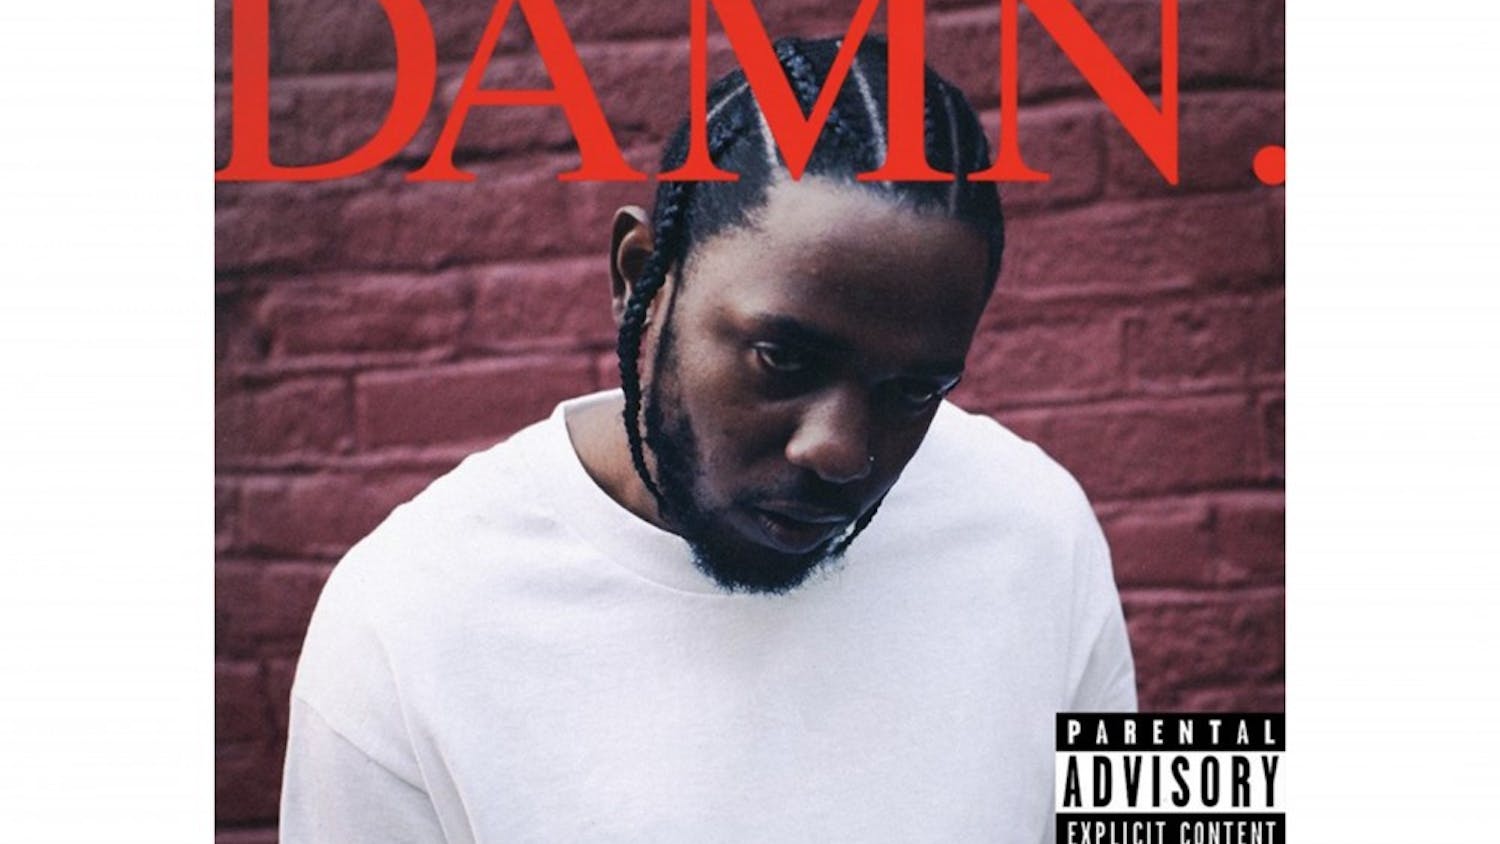 Kendrick Lamar released his album "Damn" in April. "Damn" is one of the many standout albums of 2017.